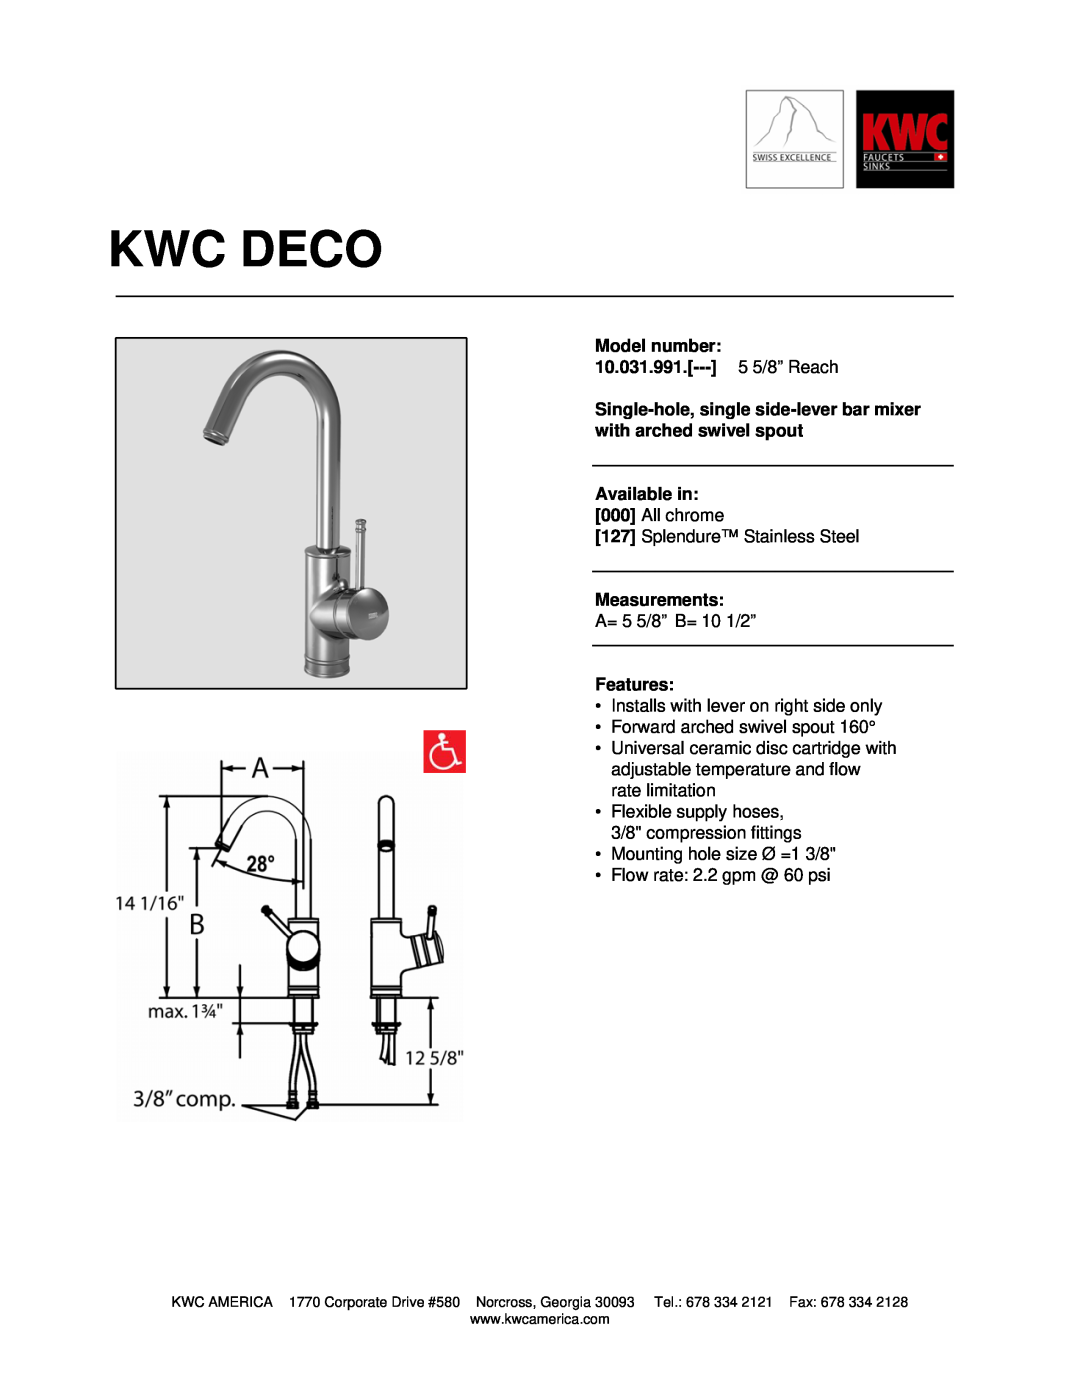 KWC manual Kwc Deco, Model number 10.031.991.--- 5 5/8” Reach, Available in, Measurements, Features 